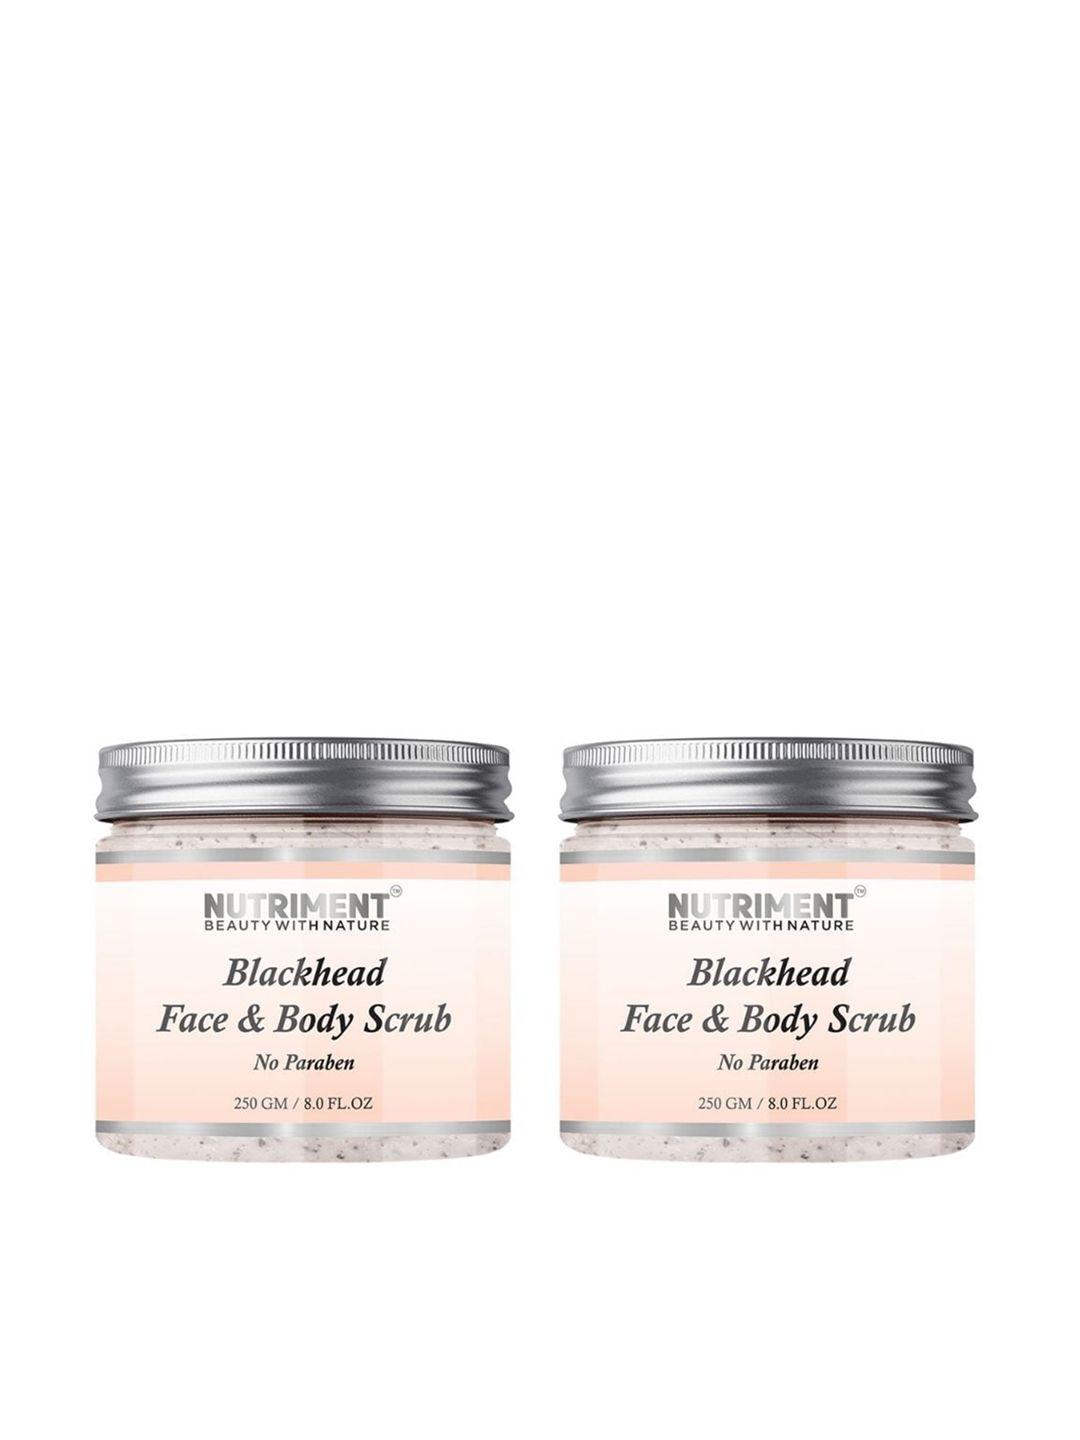 nutriment blackhead face and body scrub, 250gm (pack of 2)